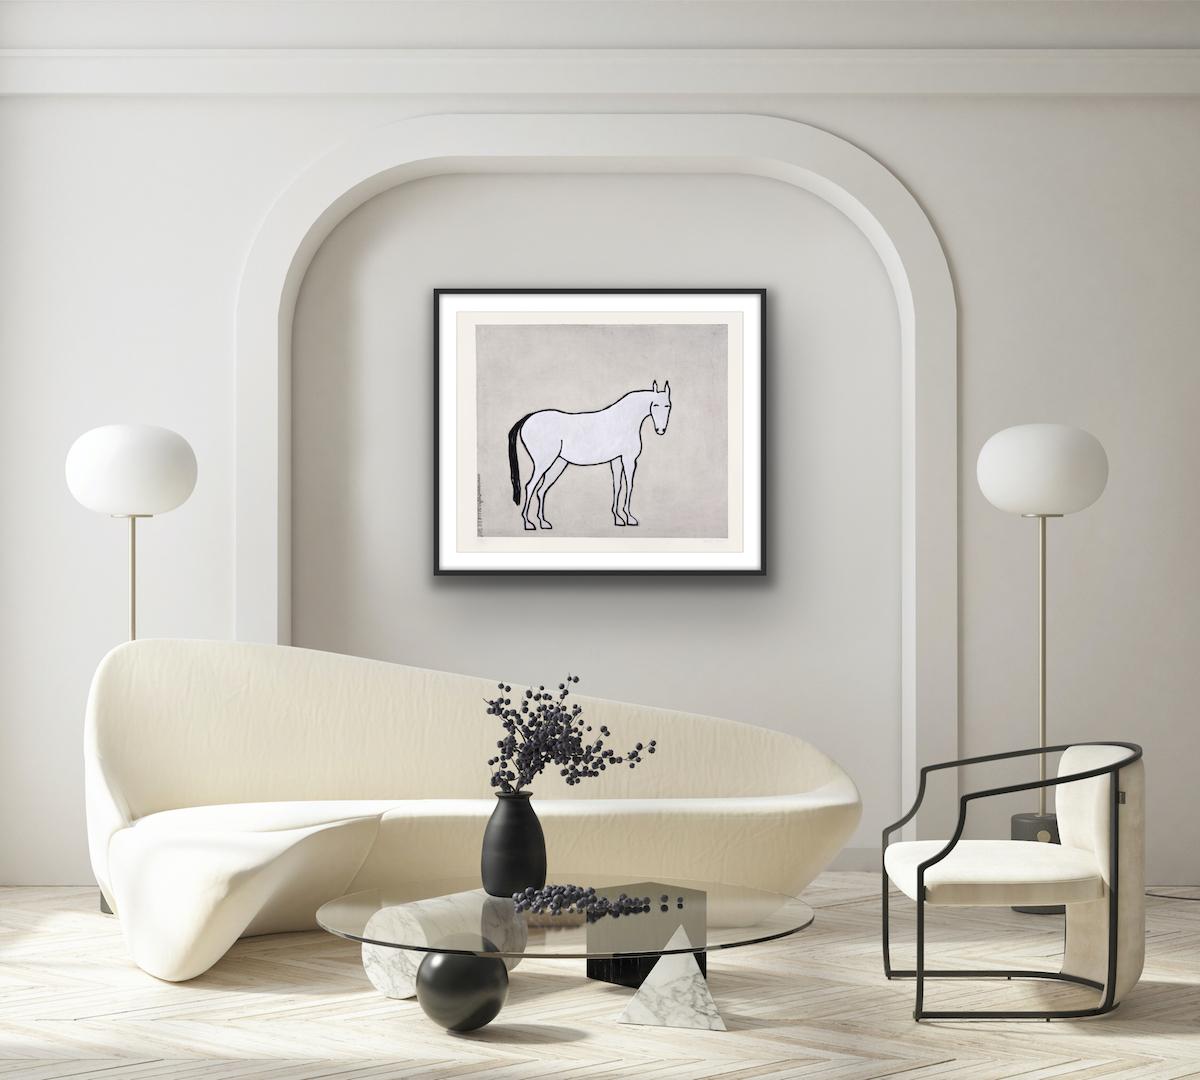 Austen is a limited edition drypoint print by artist Kate Boxer, featuring a white horse looking behind in a minimalist composition.

ADDITIONAL INFORMATION:
Drypoint print, Handmade print
Edition of 30
79 H x 89 W x 0.5 D cm (31.10 x 35.04 x 0.20